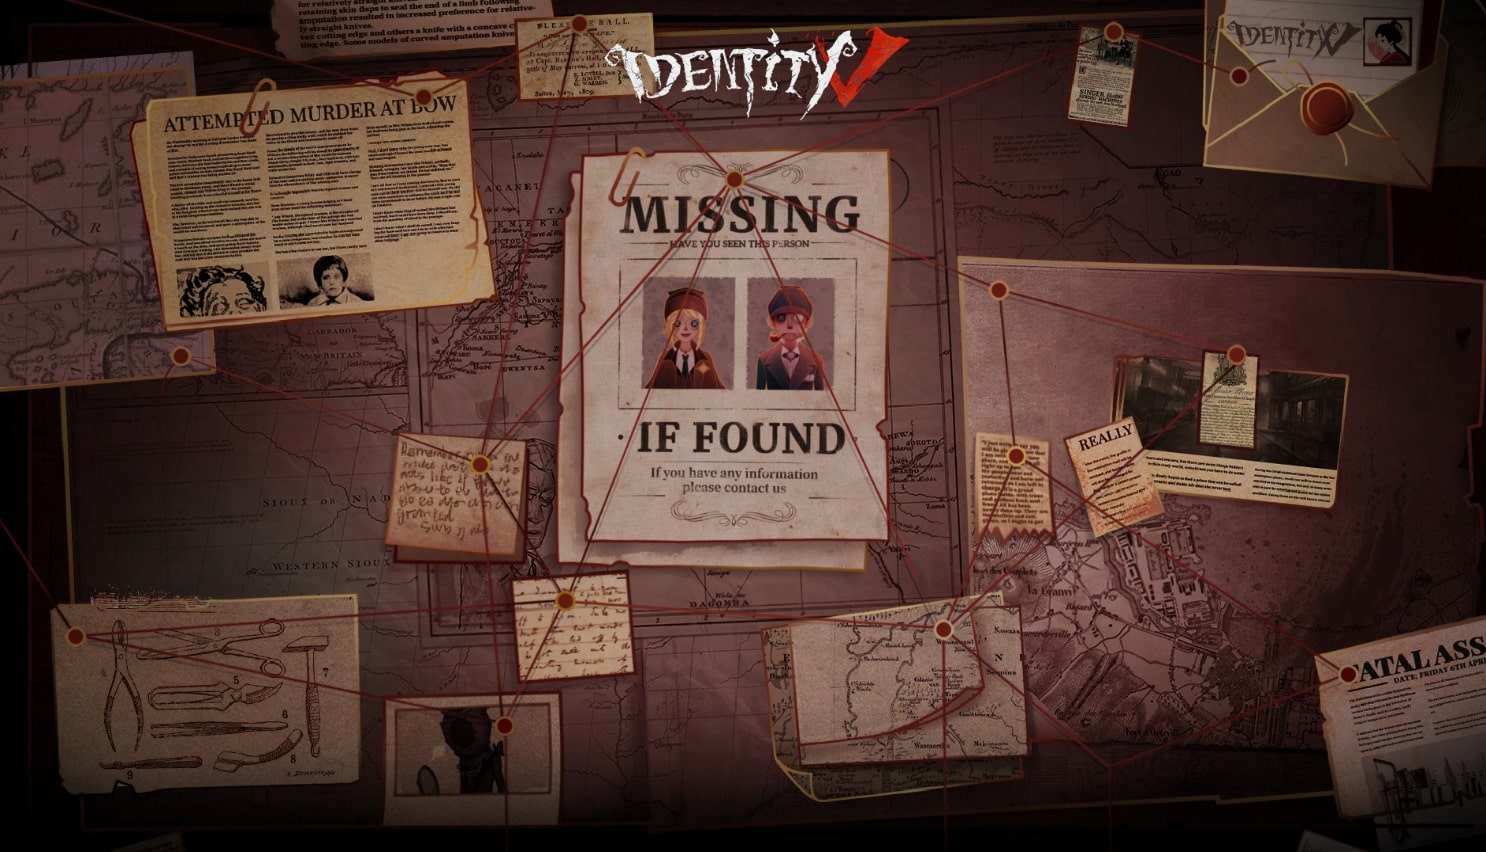 Identity V x Angels of Death Crossover All Info About Upcoming Skins 